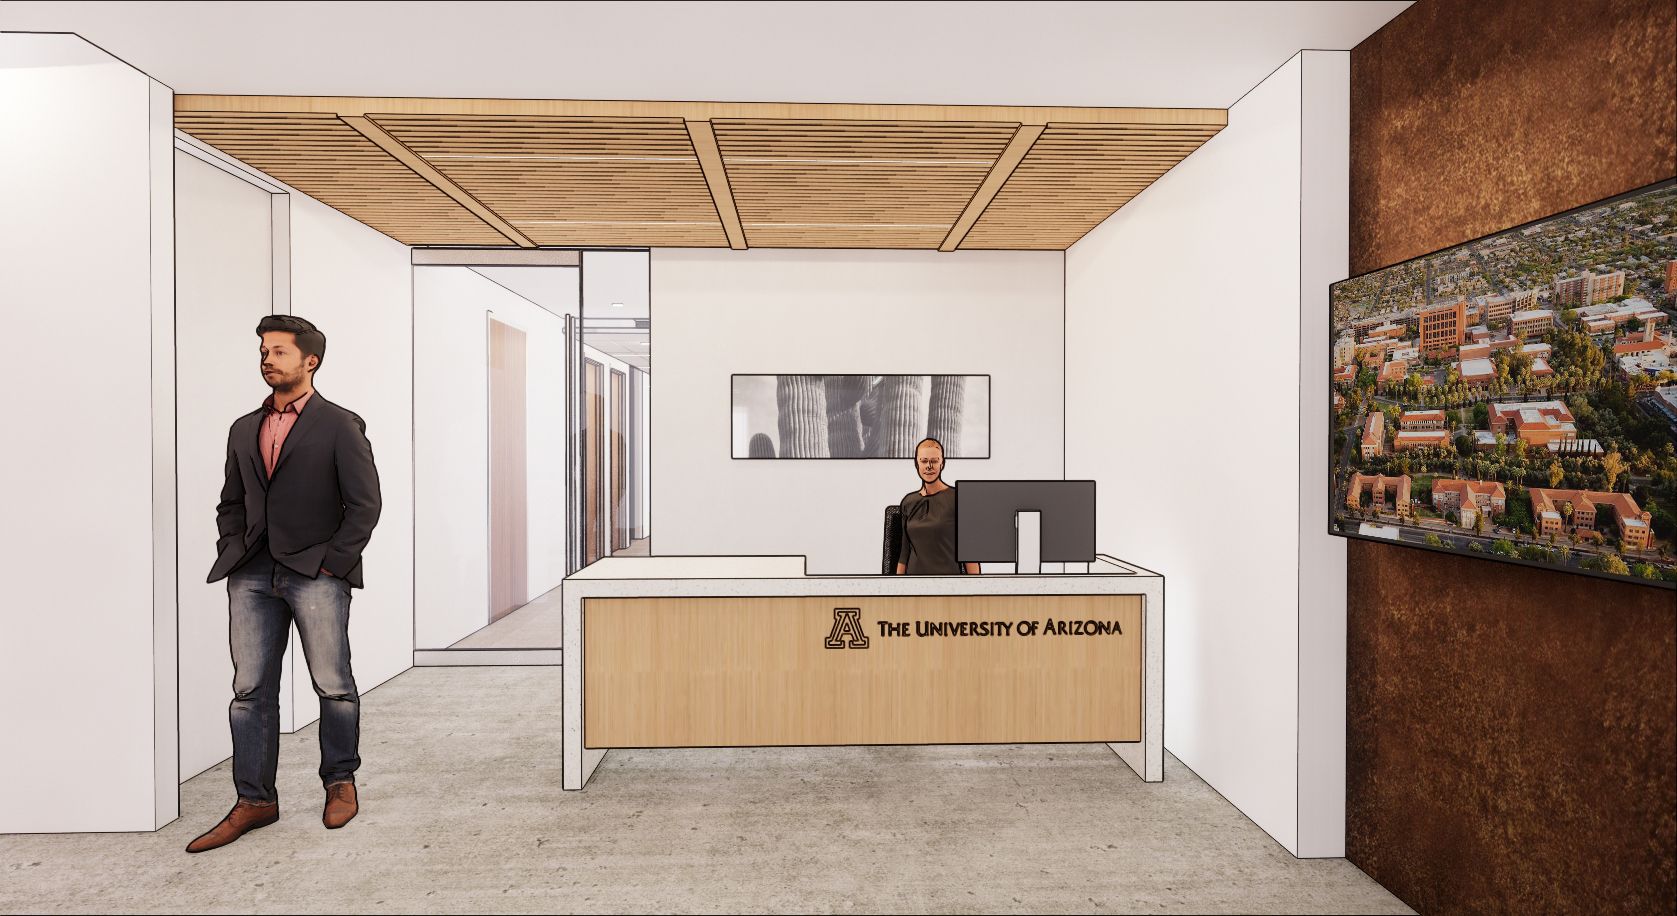 Illustrated rendering of the reception desk in the DC center